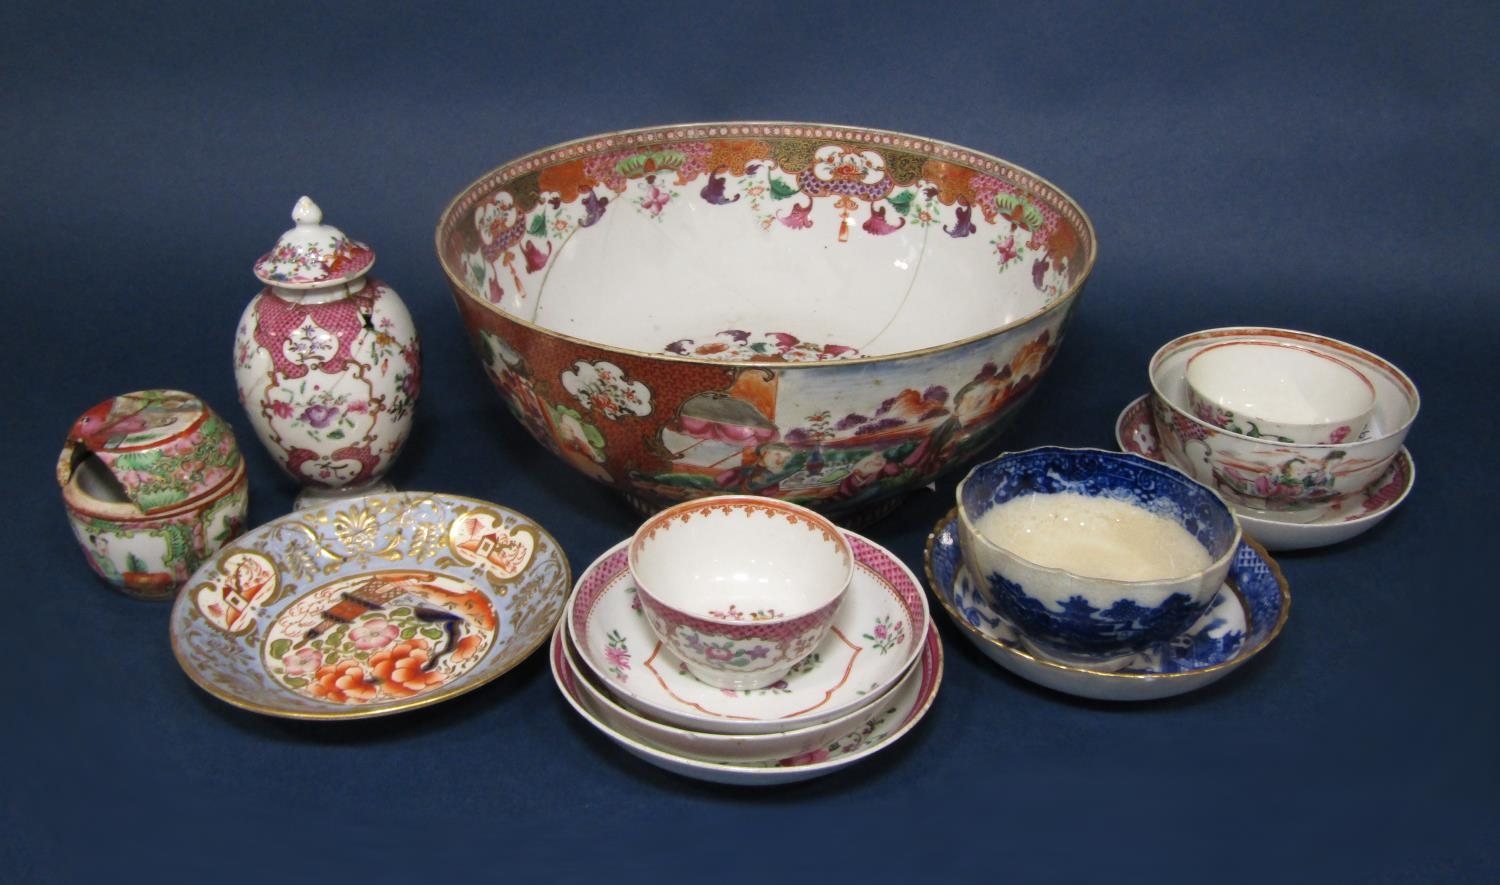 A collection of 18th century and later oriental ceramics and European ceramics in the chinoiserie